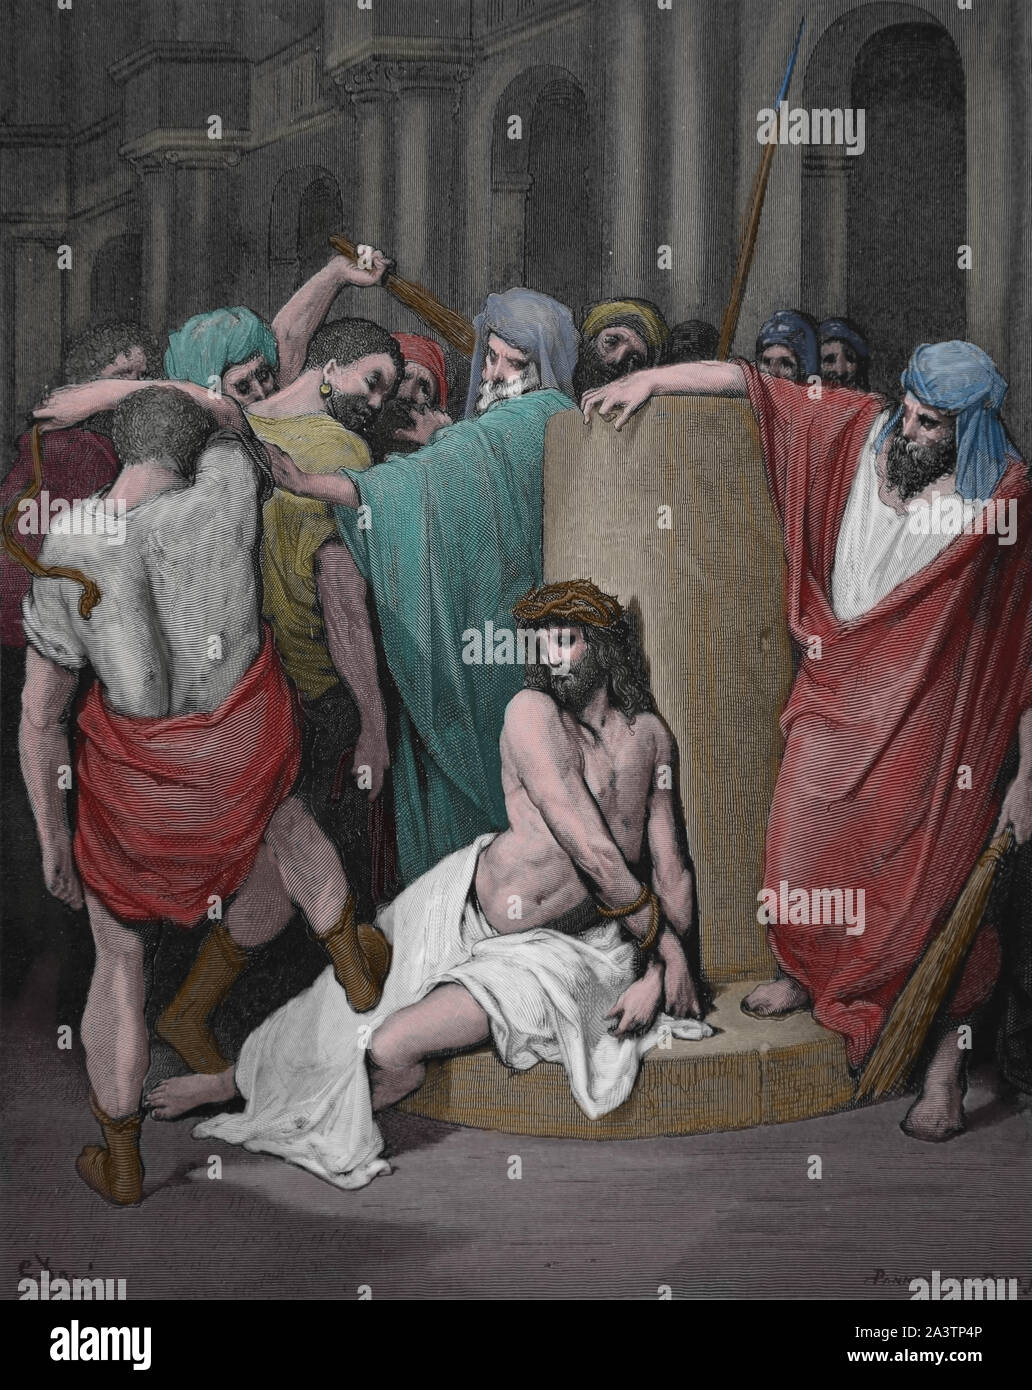 Passion. Jesus Scourged.  John 19:1. Engraving. Bible Illustration by Gustave Dore. 19th century. Later colouration. Stock Photo